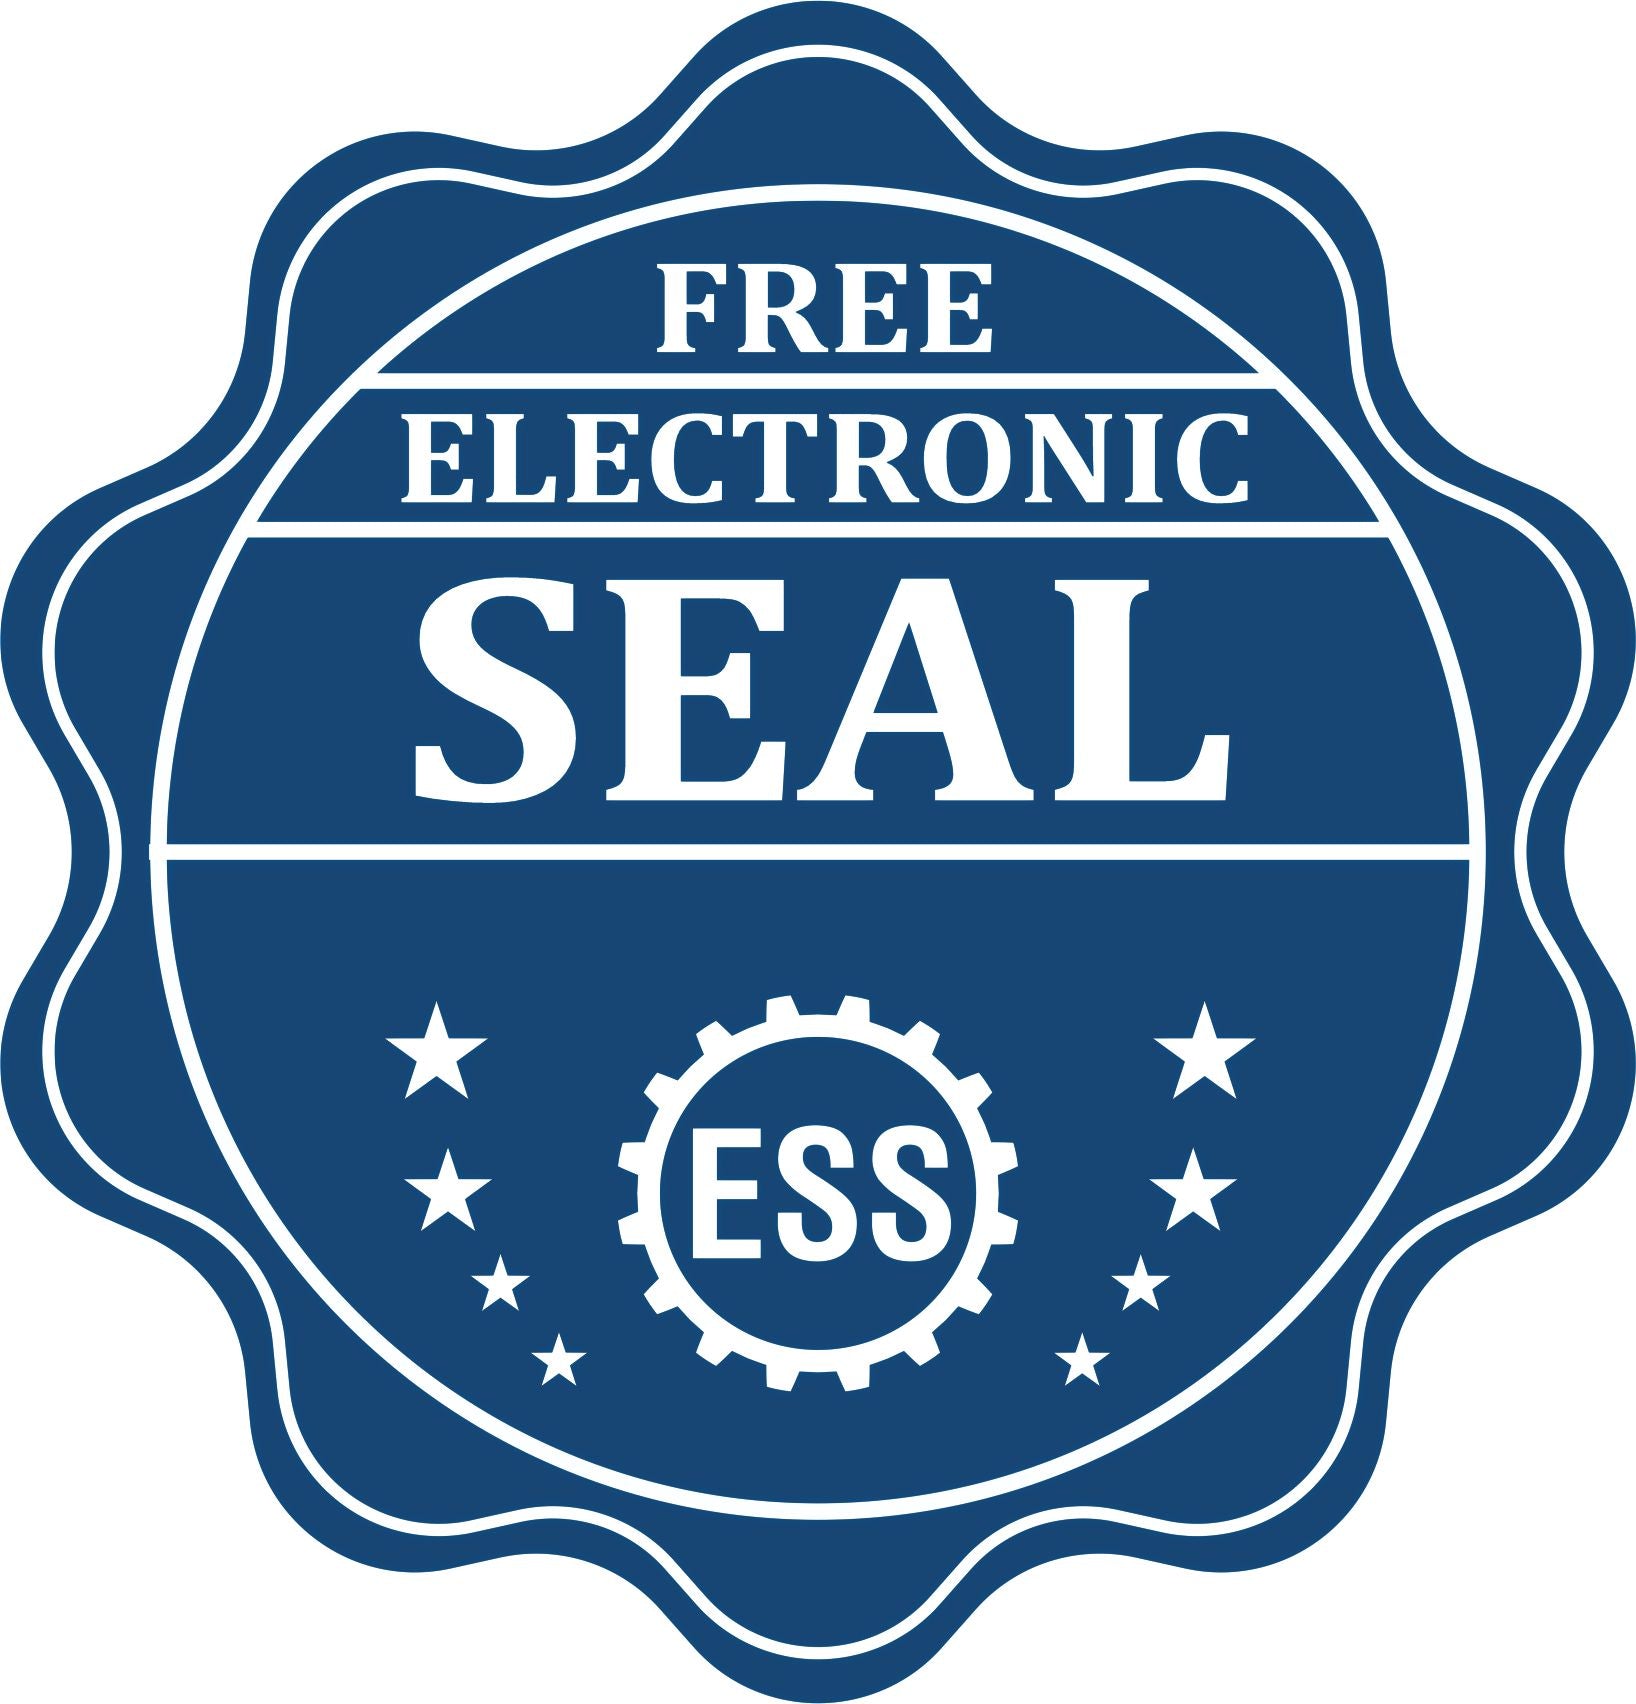 A badge showing a free electronic seal for the State of Nevada Extended Long Reach Geologist Seal with stars and the ESS gear on the emblem.